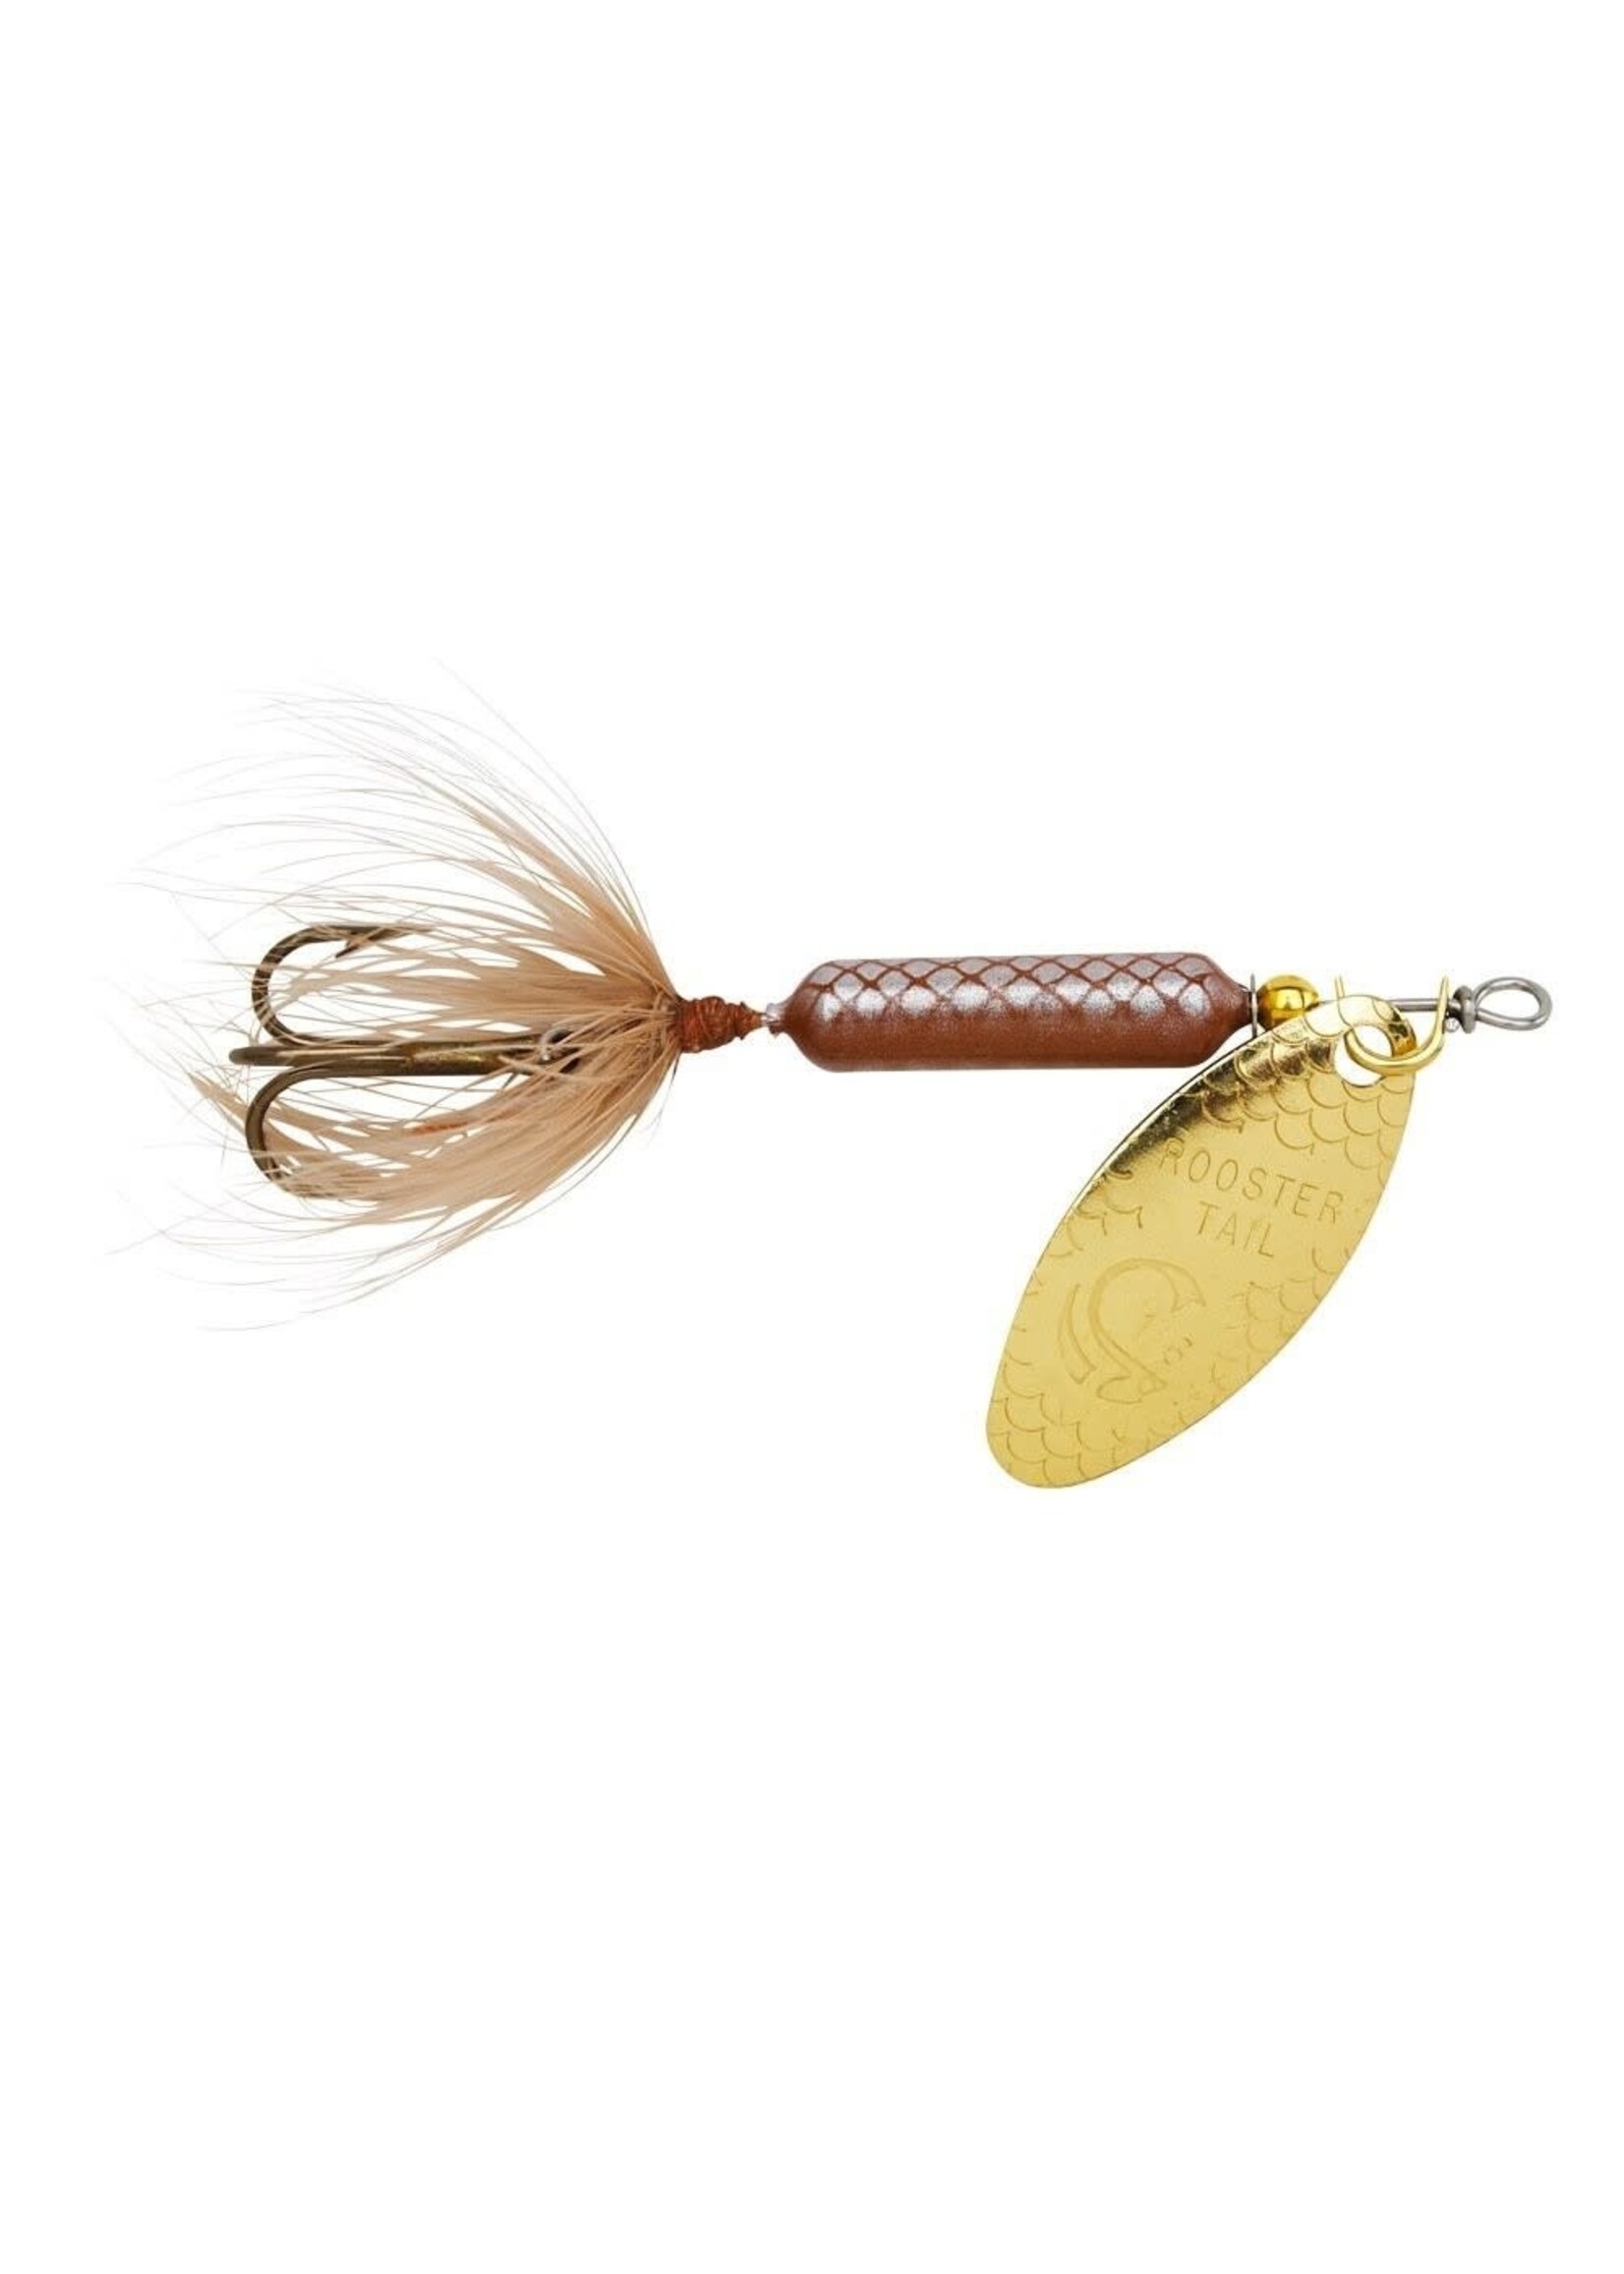 Rooster Tail Spinners 1/16 oz. - Tackle Shack